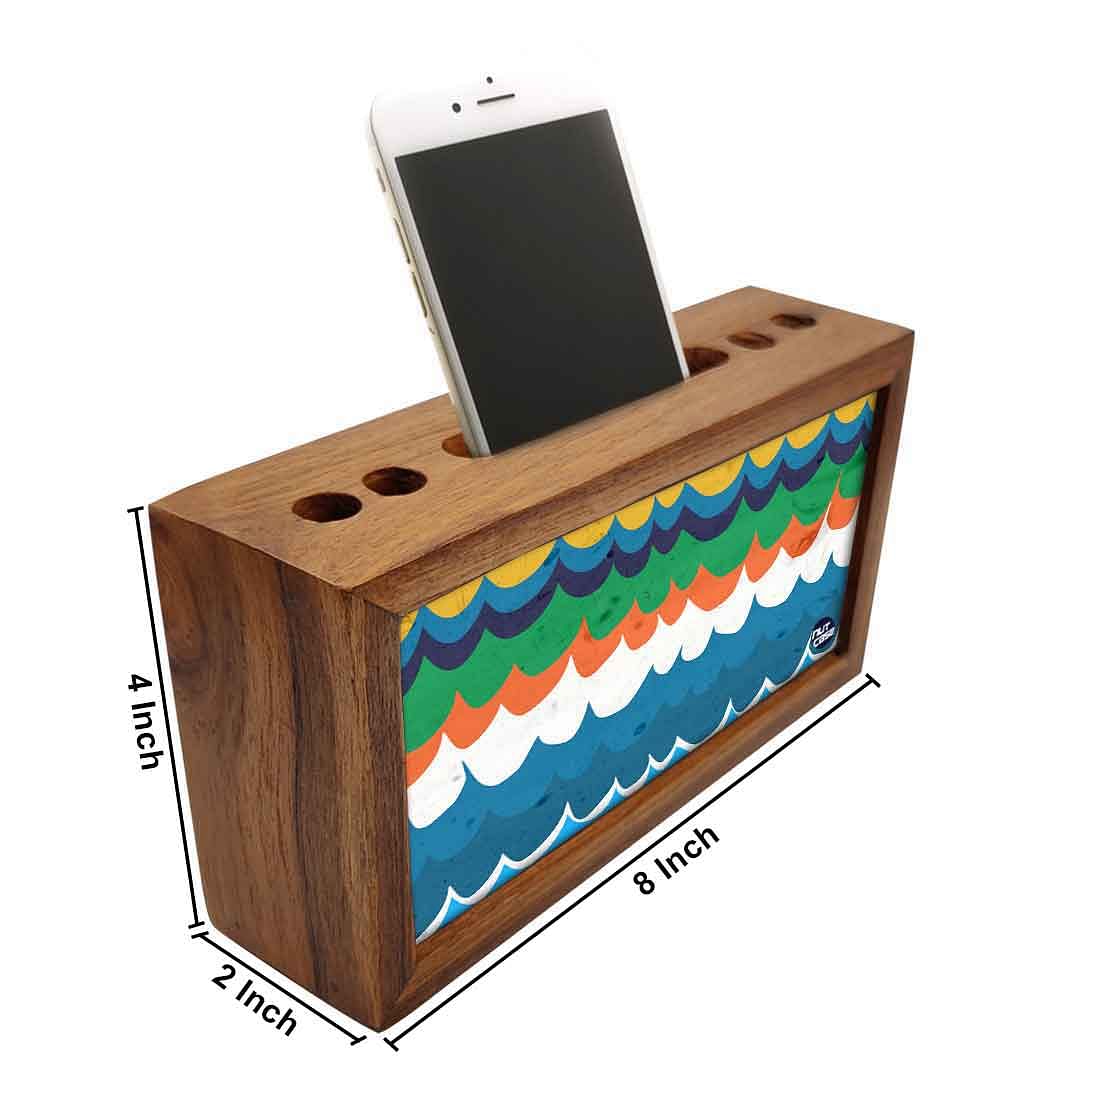 Wooden Pen Holder with Phone Stand Desk Organizer - Waves Nutcase